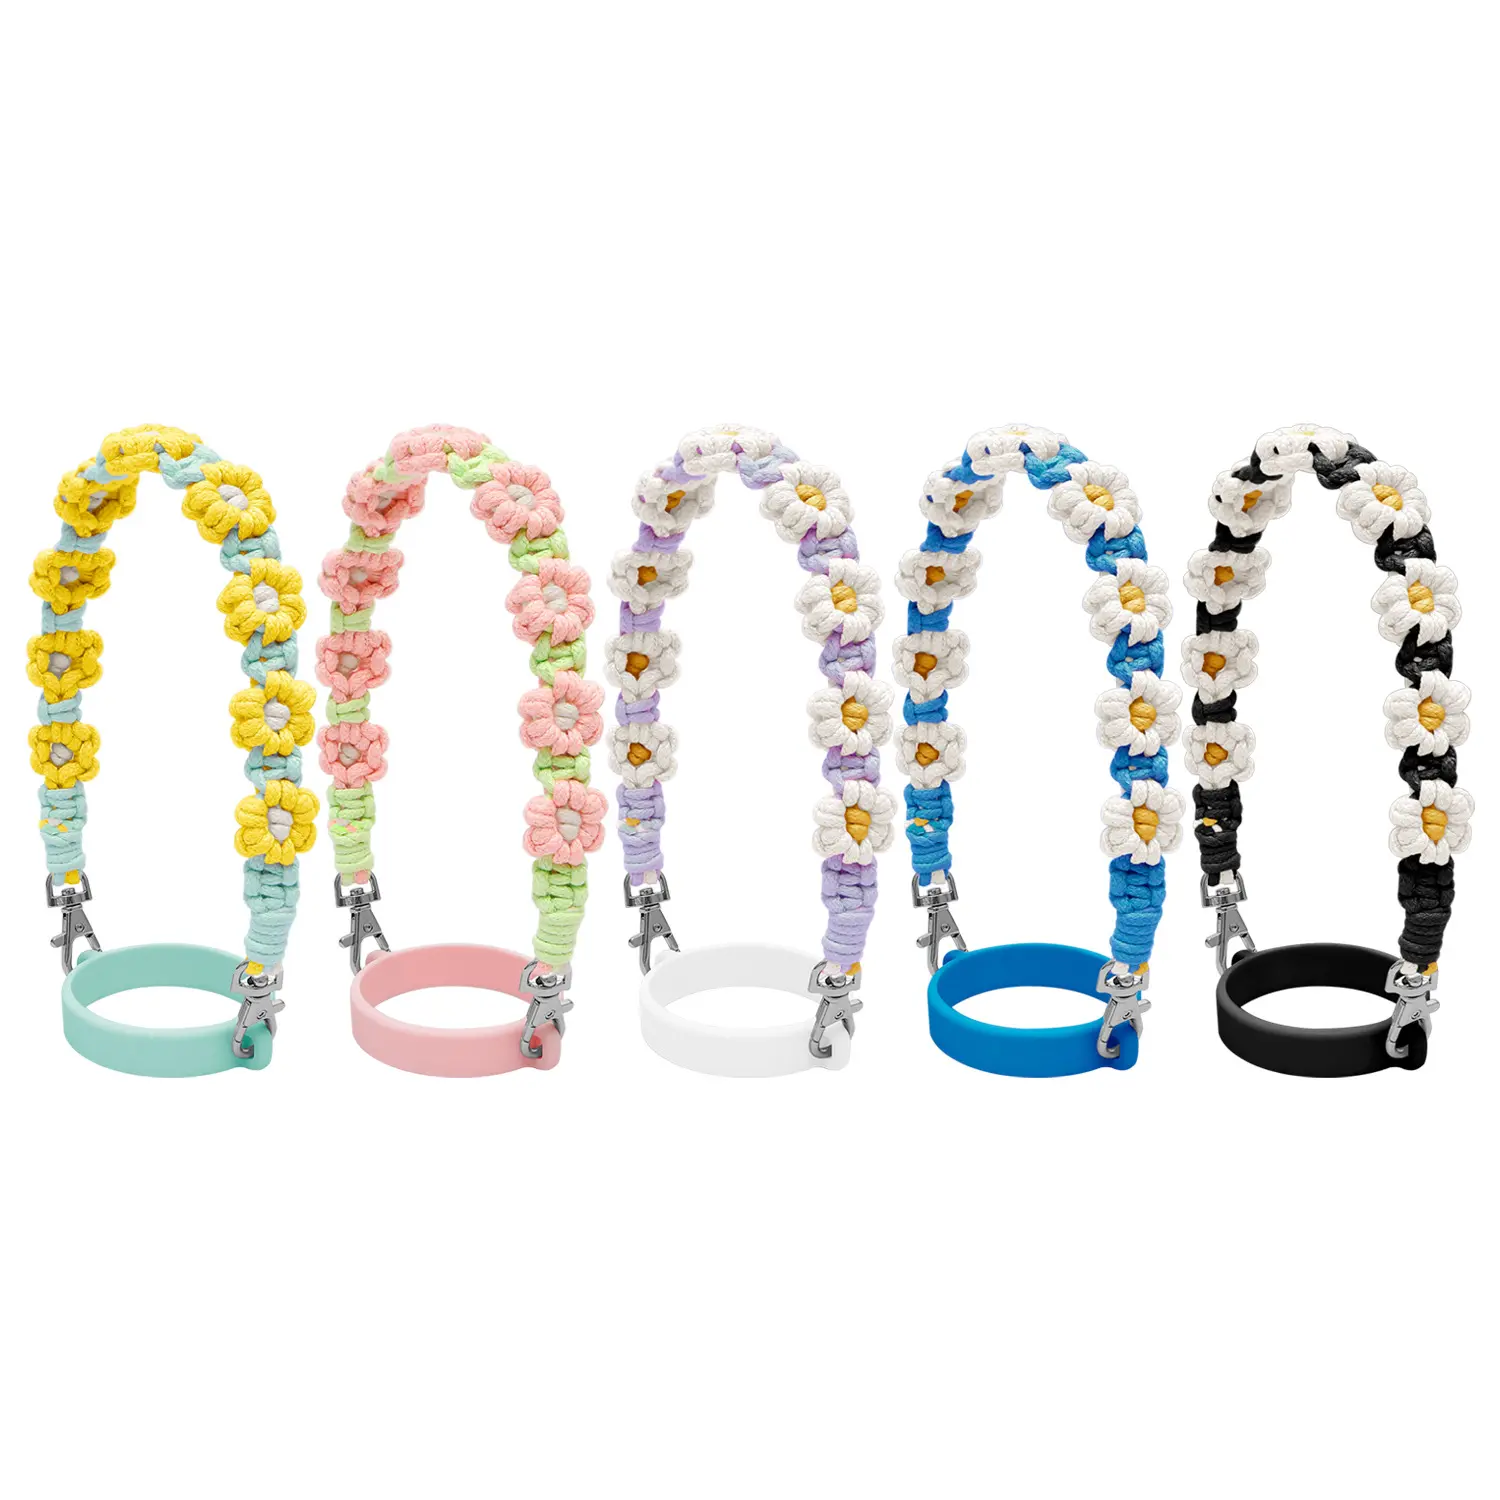 ins popular hand-woven Daisy Boho flower thickened silicone ring portable 40oz water bottles strap lanyard cup holder